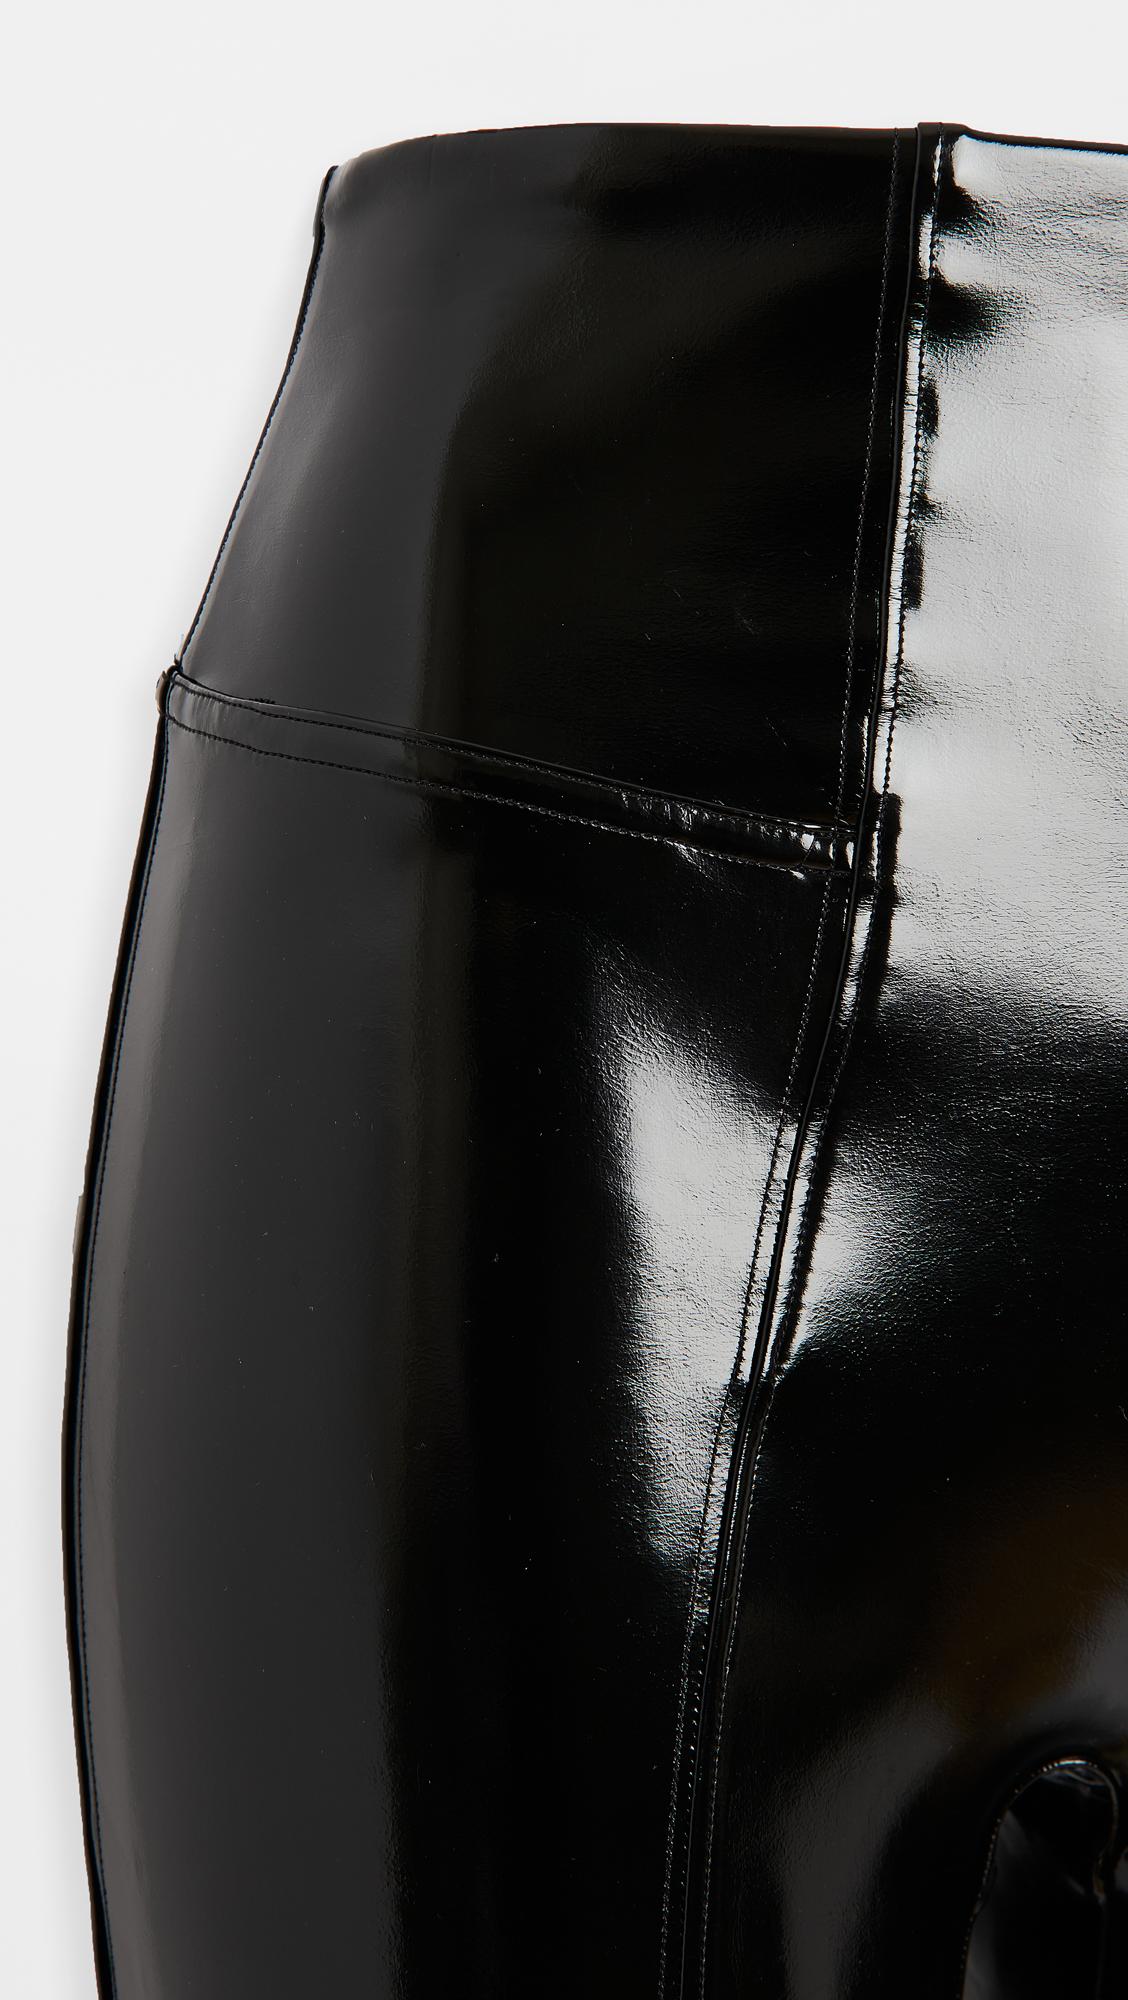 Spanx Faux Patent Leather Leggings in Black - Lyst